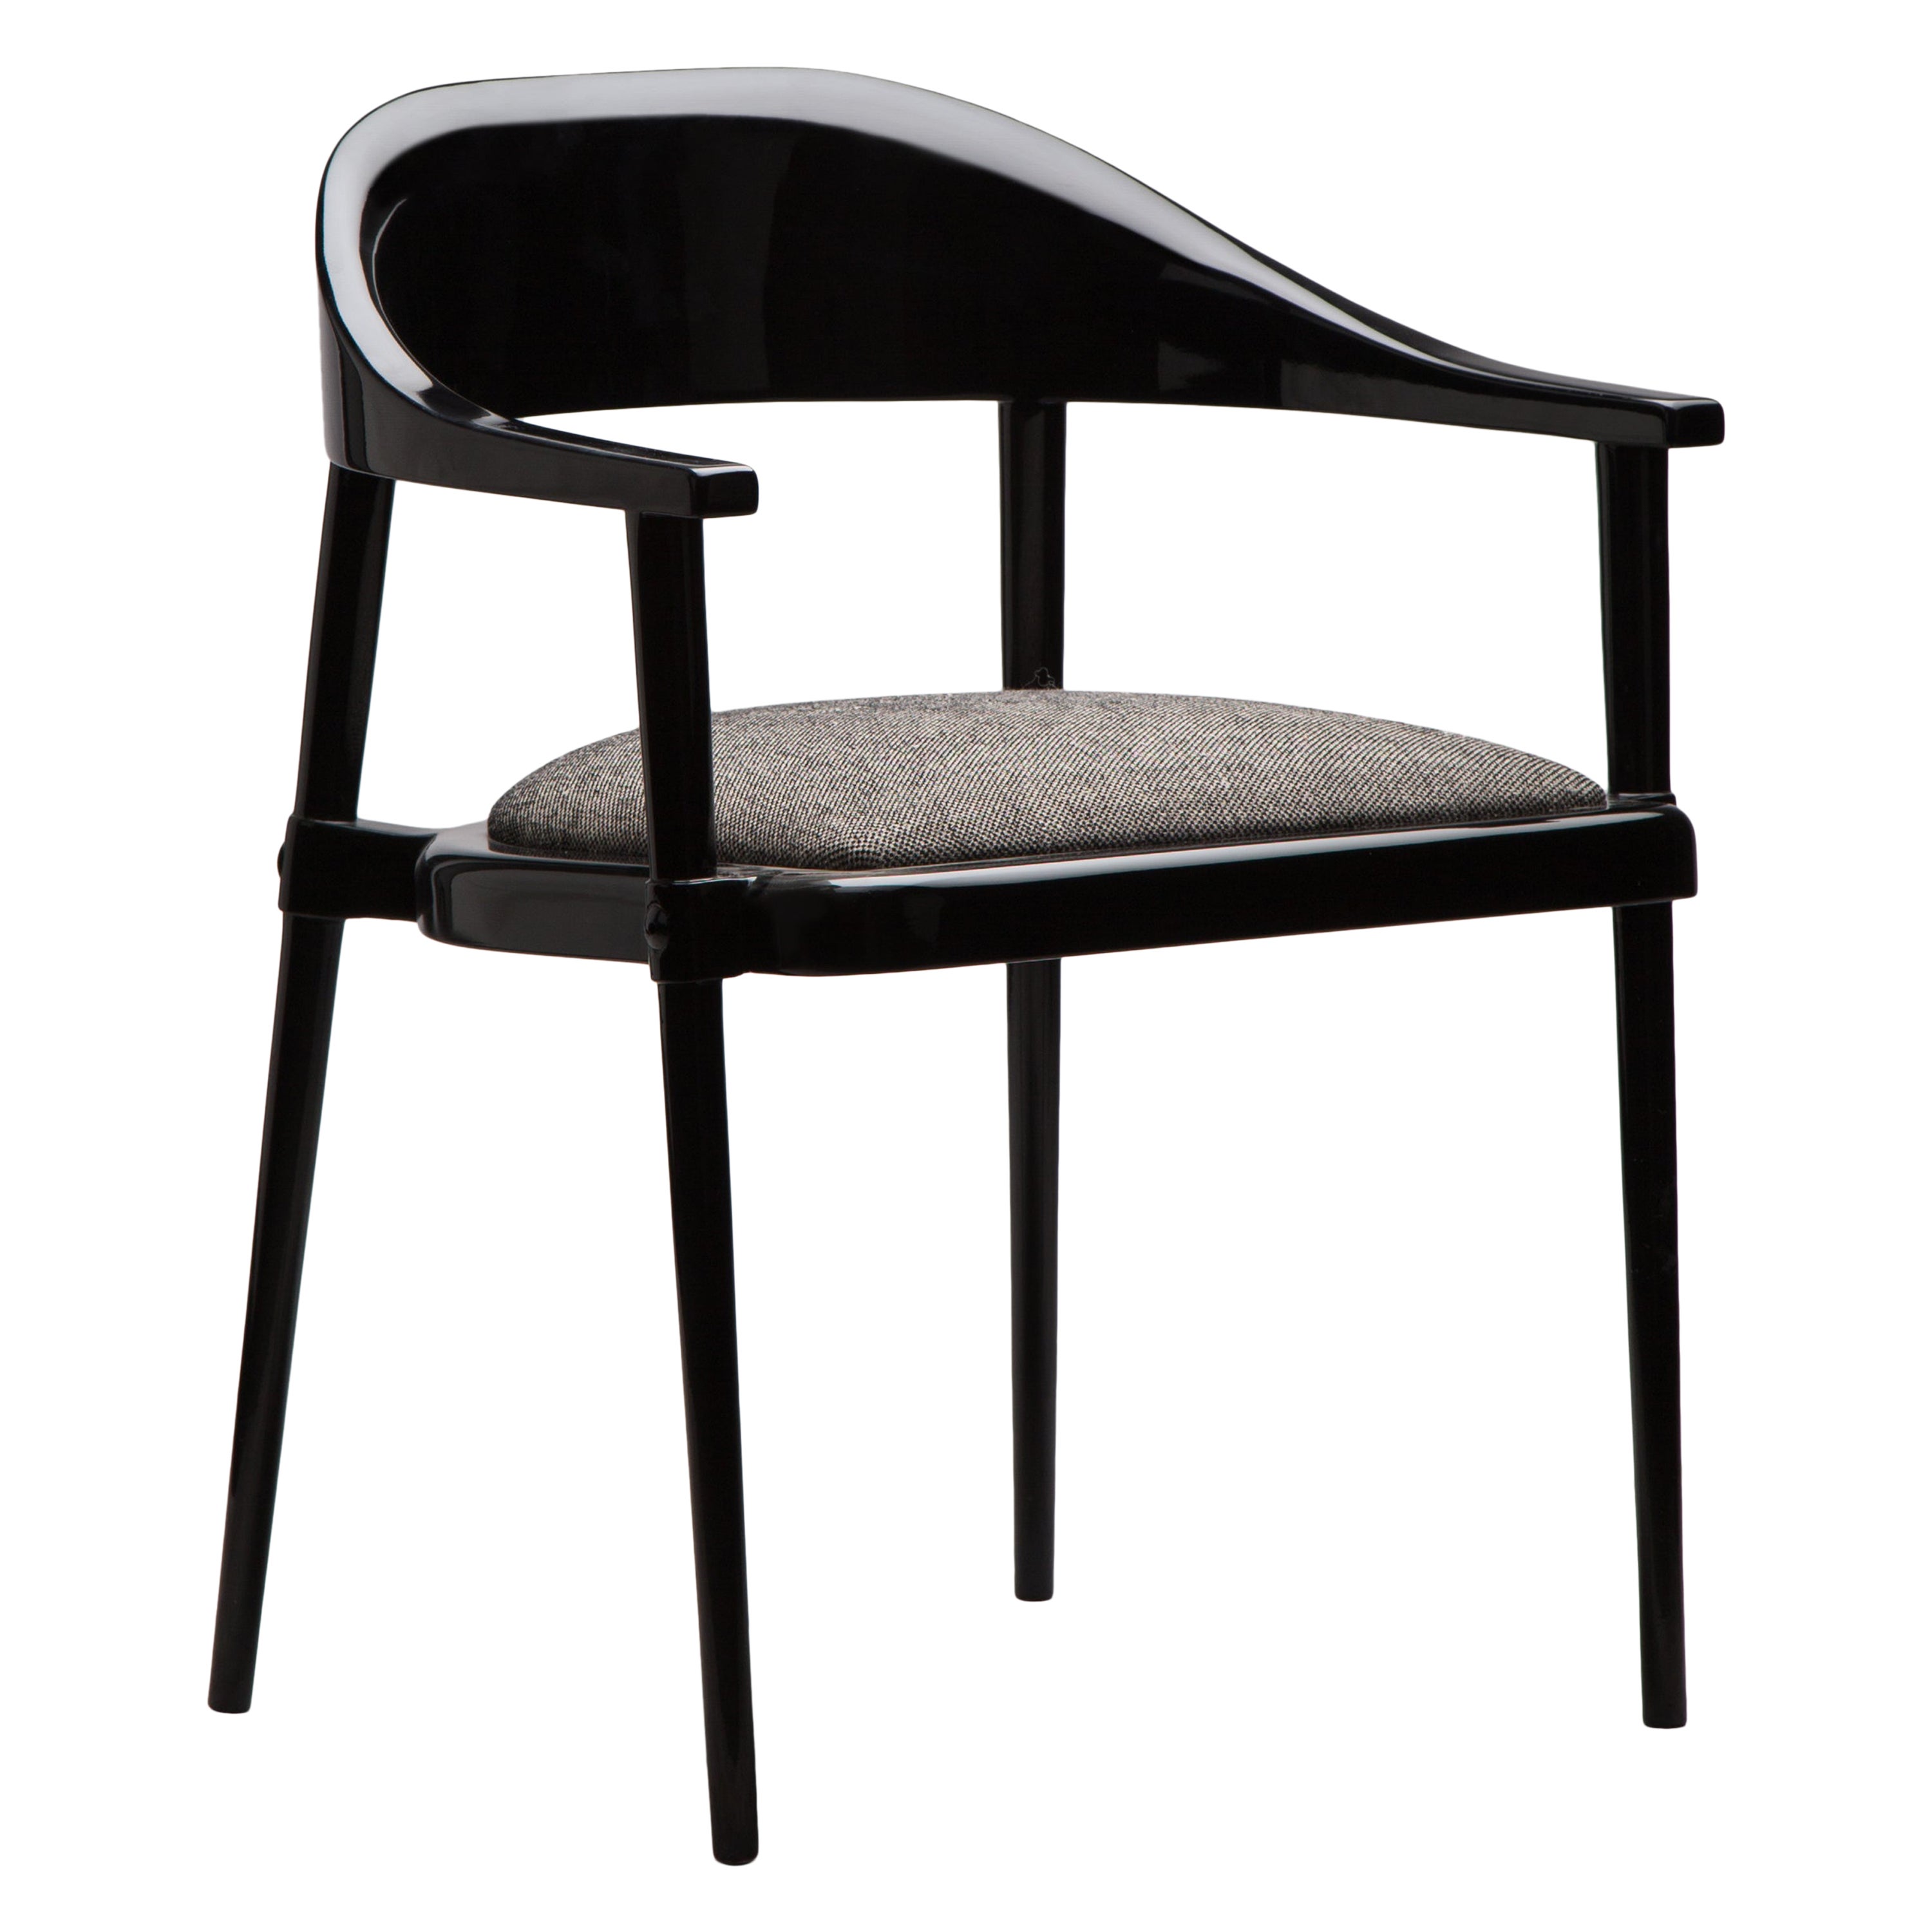 Luxurious Lacquered Sleek Black Dining and Armchair with Upholstery